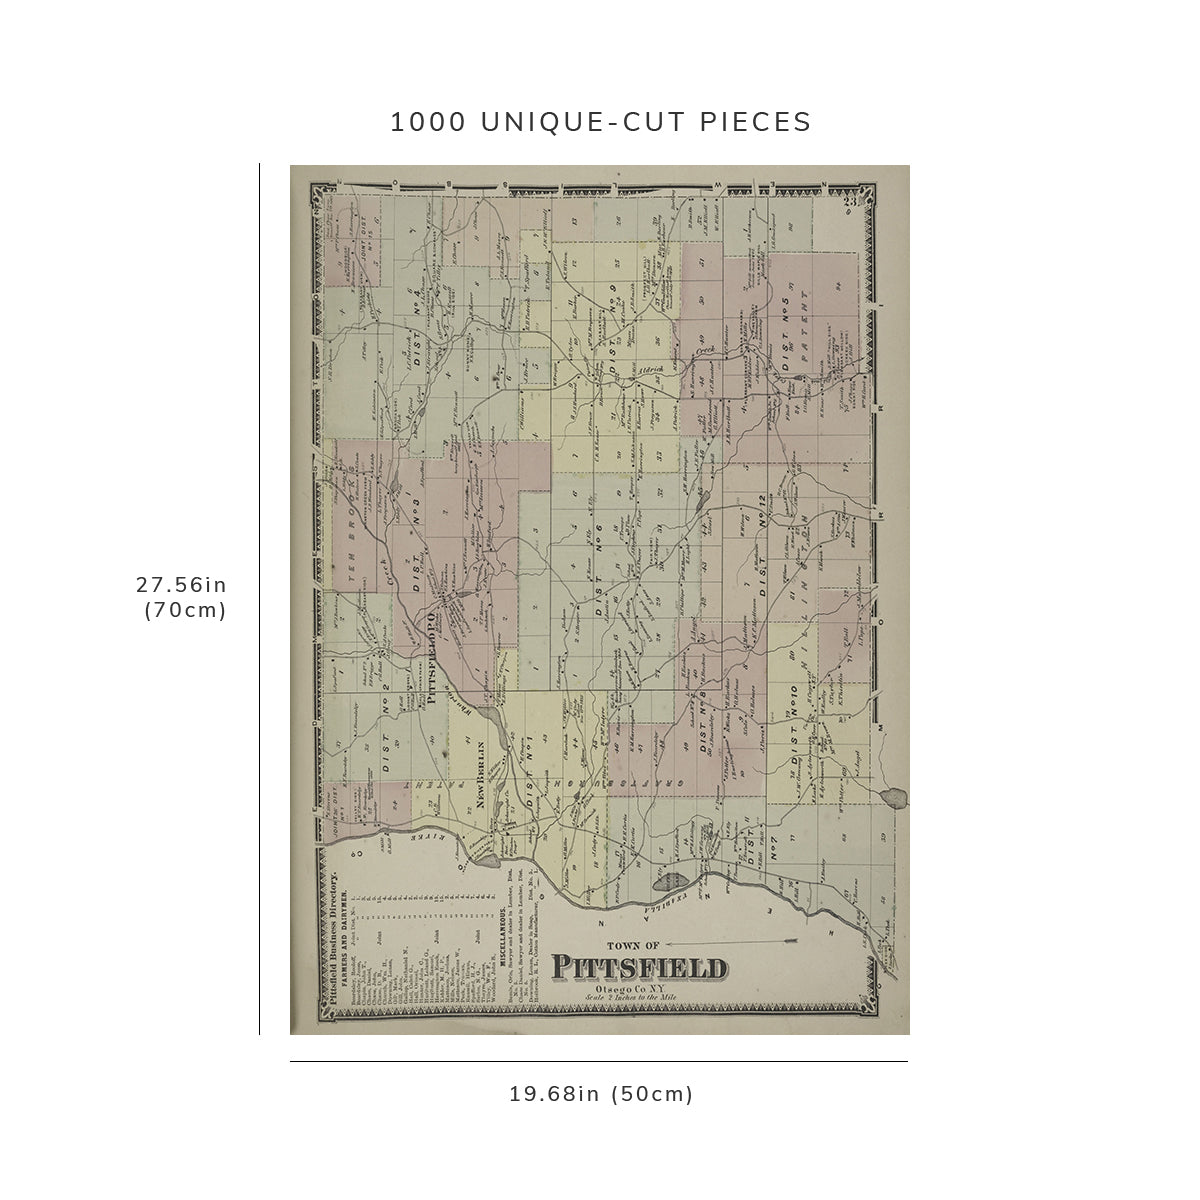 1000 Piece Jigsaw Puzzle: 1868 Map of New York Town of Pittsfield, Otsego Co. N.Y. Towns